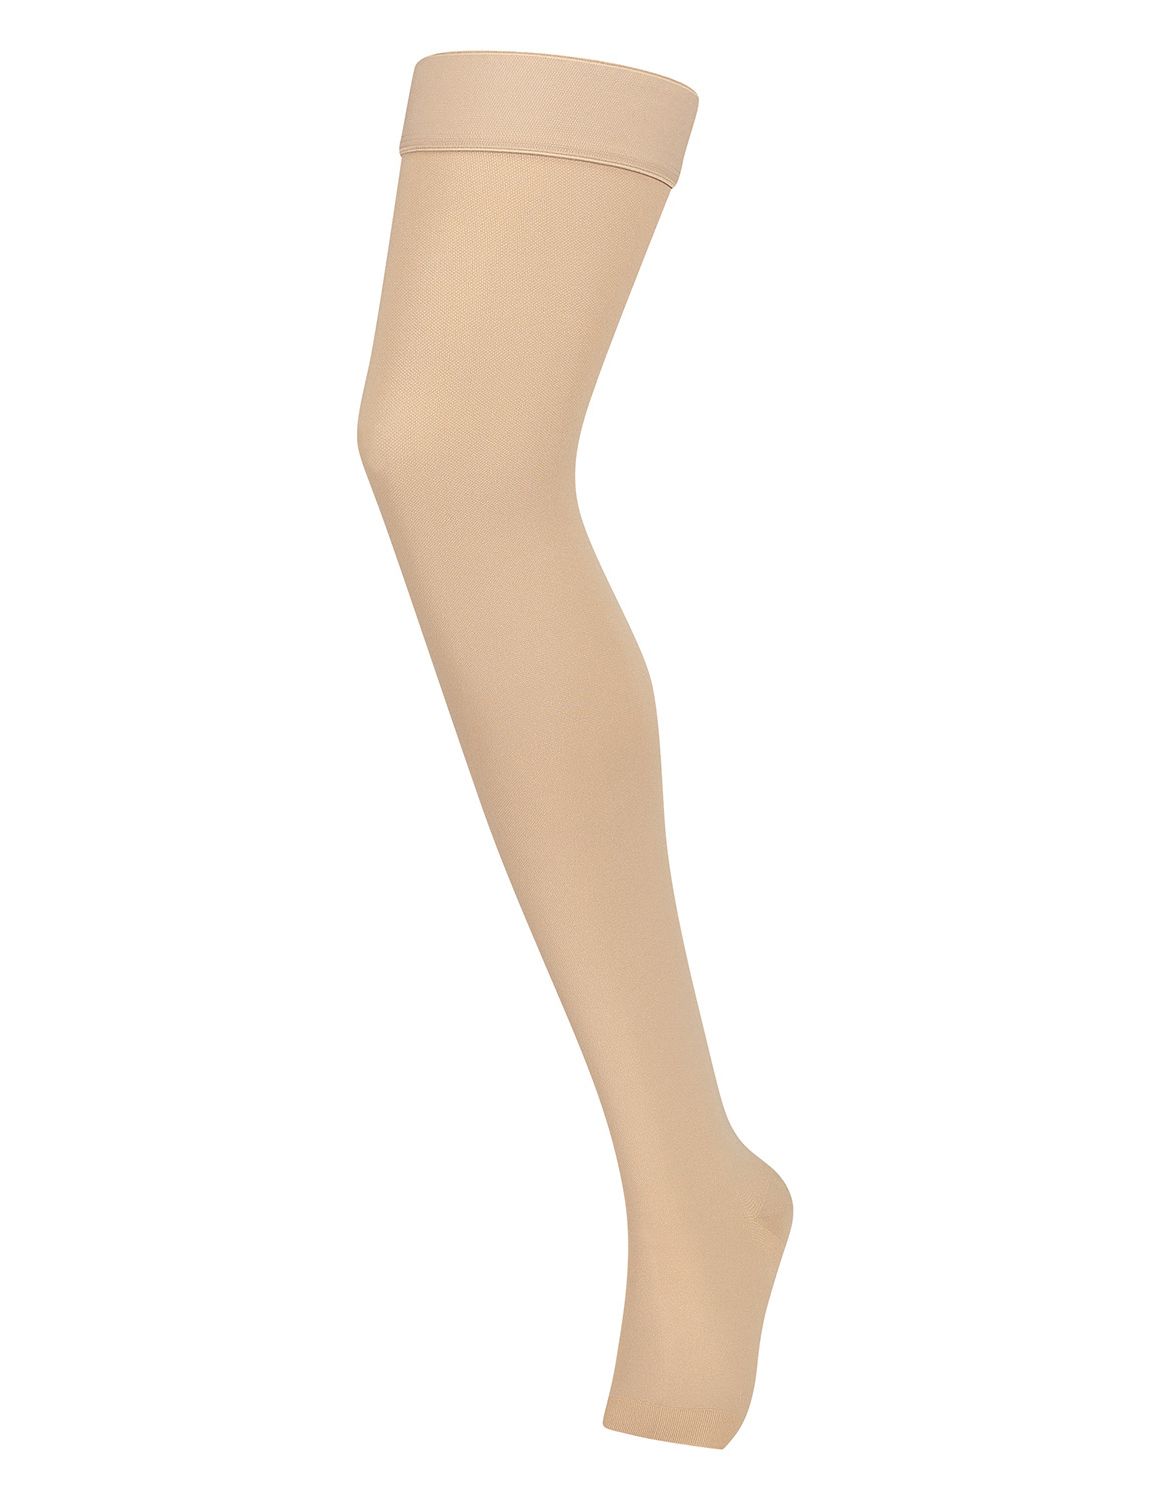 dunimed premium comfort compression stockings groin length open toe for sale